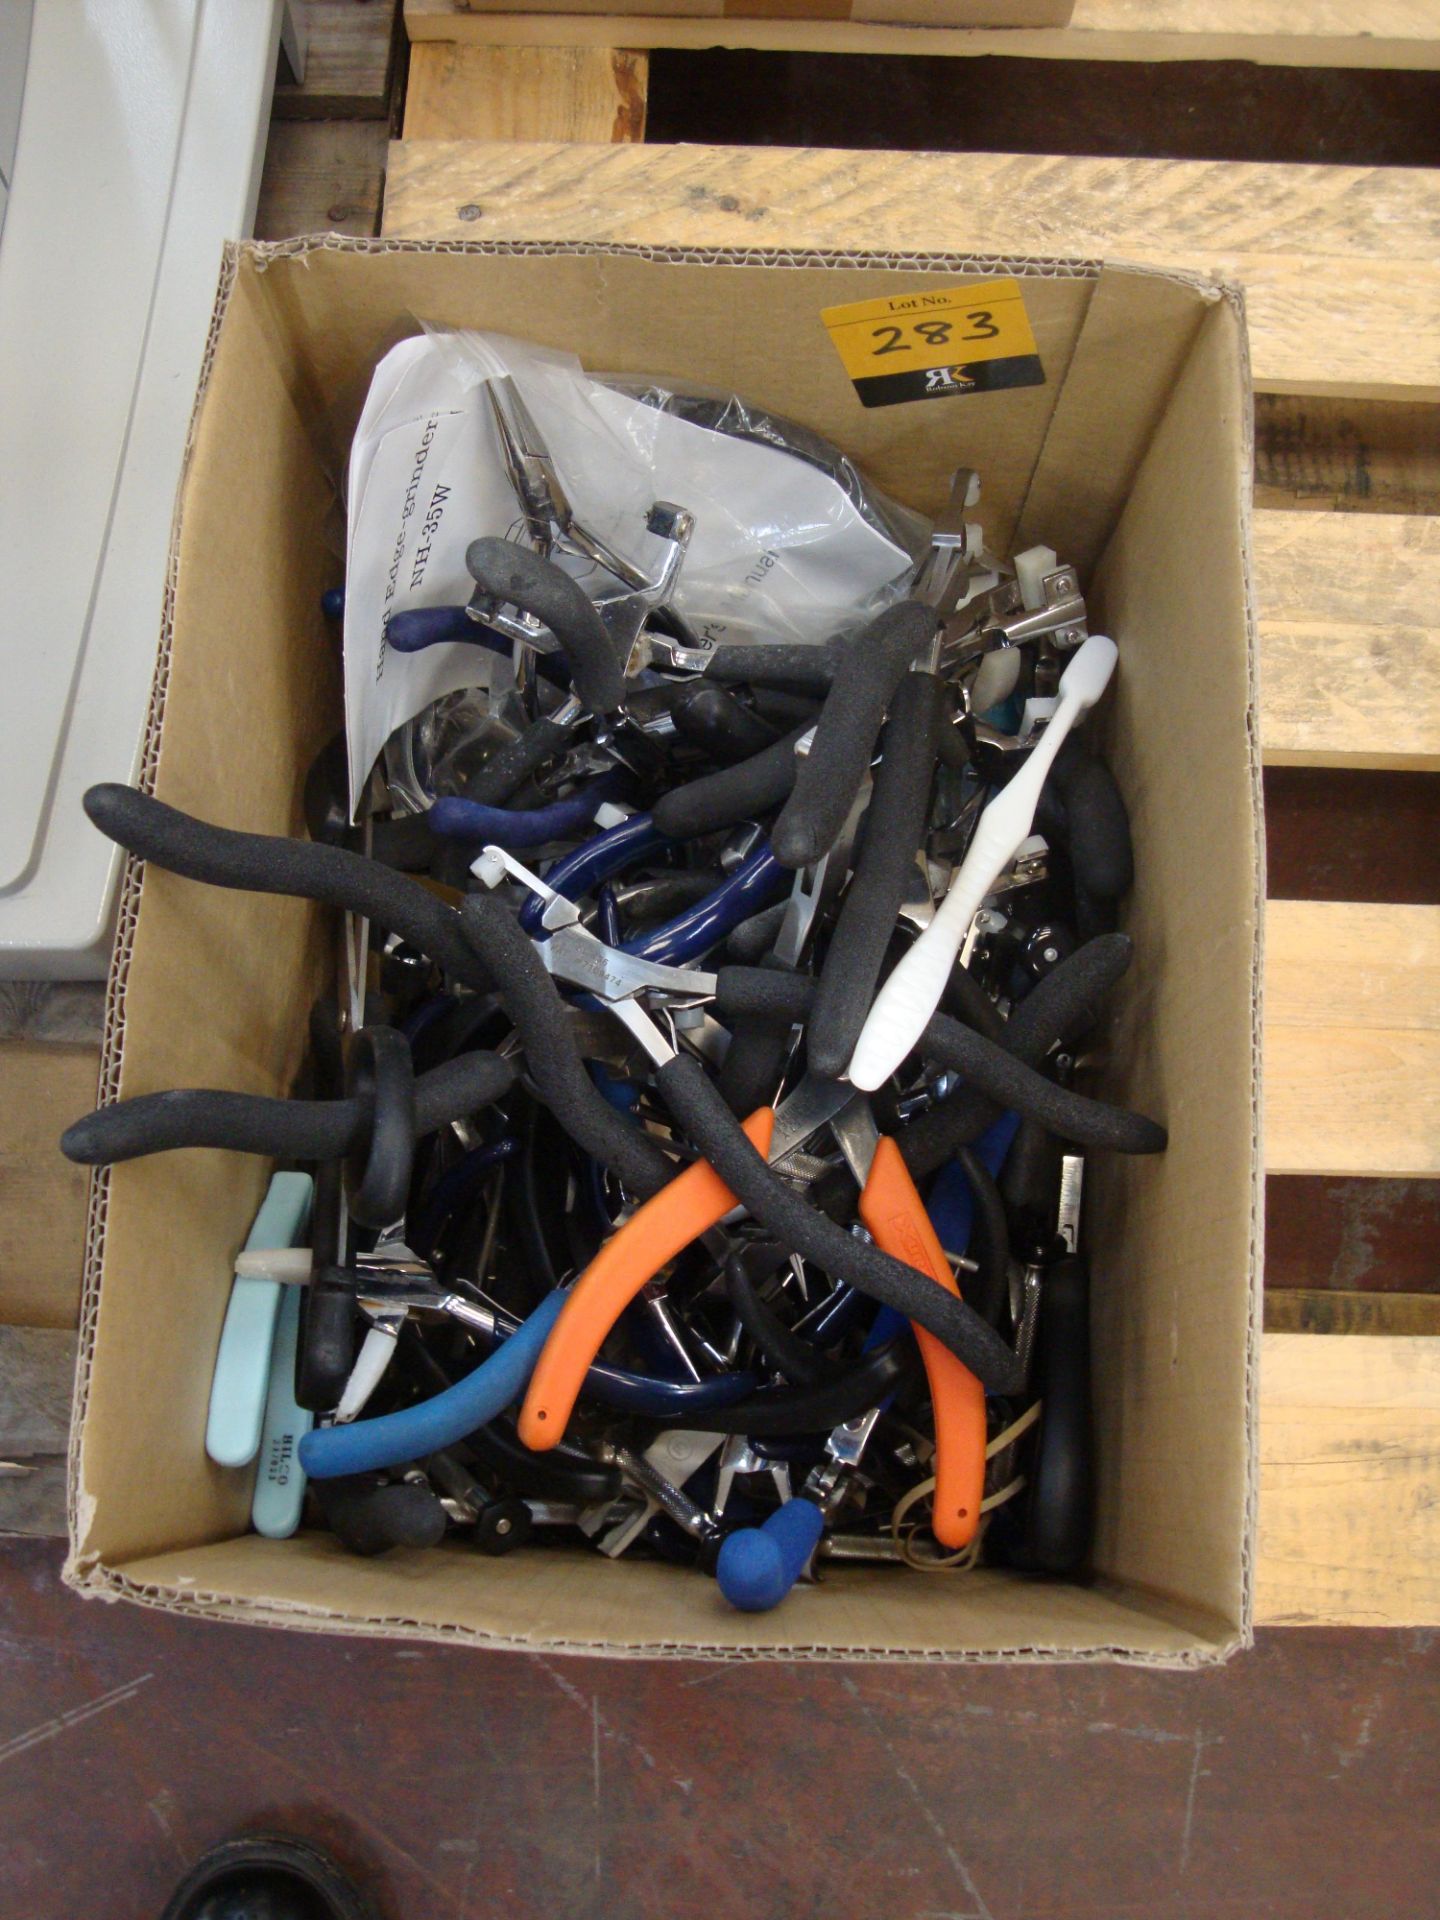 Box of pliers and other hand tools All the lots in this auction are being sold on behalf of Galaxy